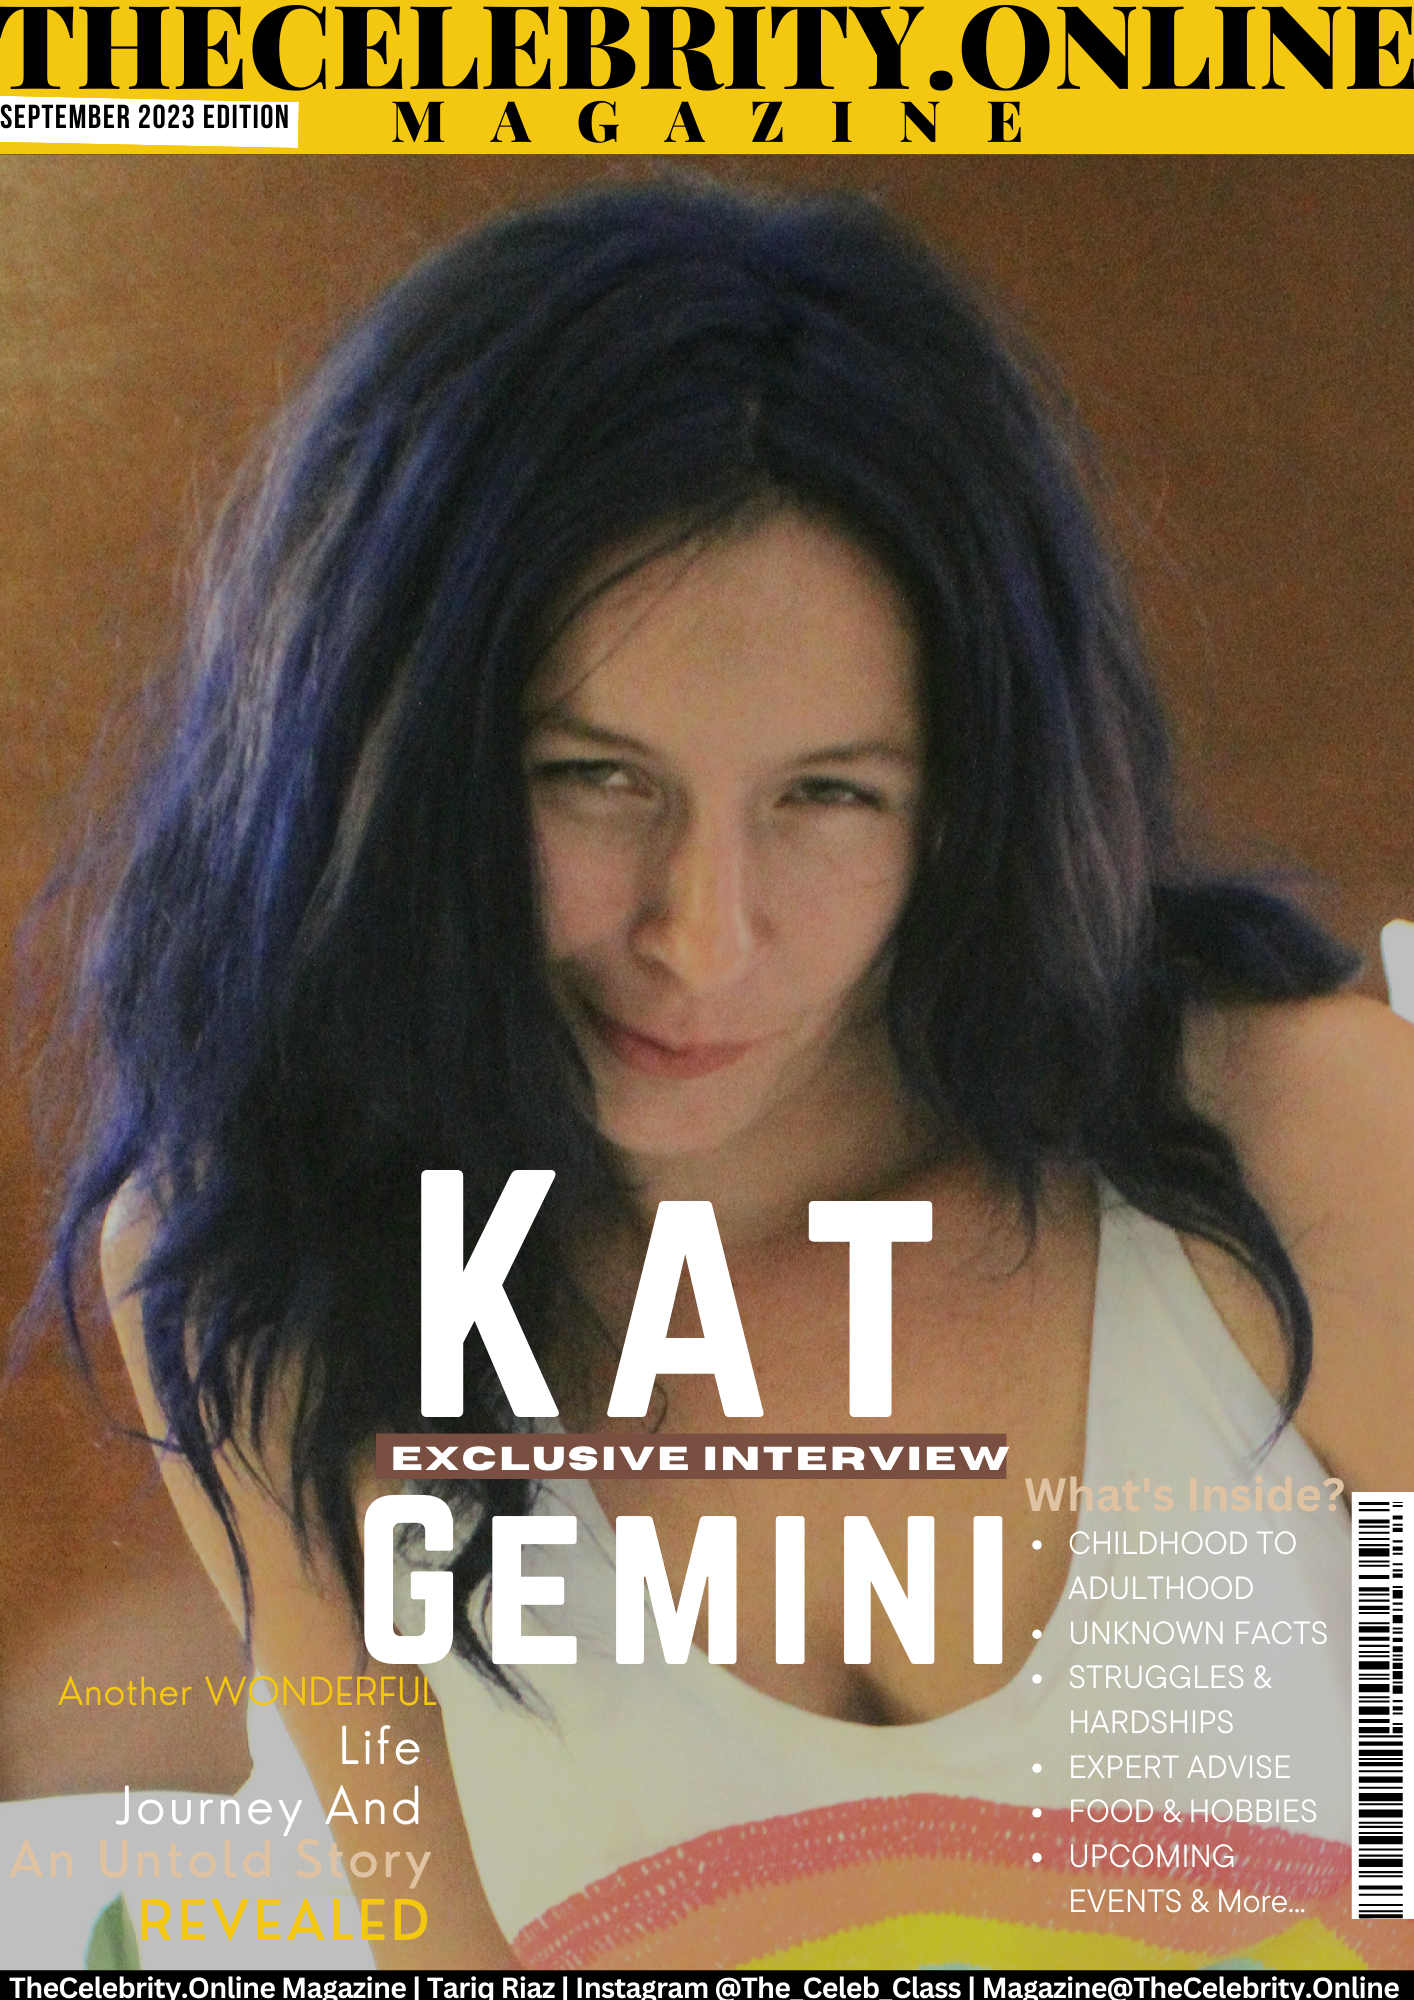 Kat Gemini Exclusive Interview – ‘Never Give Up No Matter How Hard Things Seem To Be’